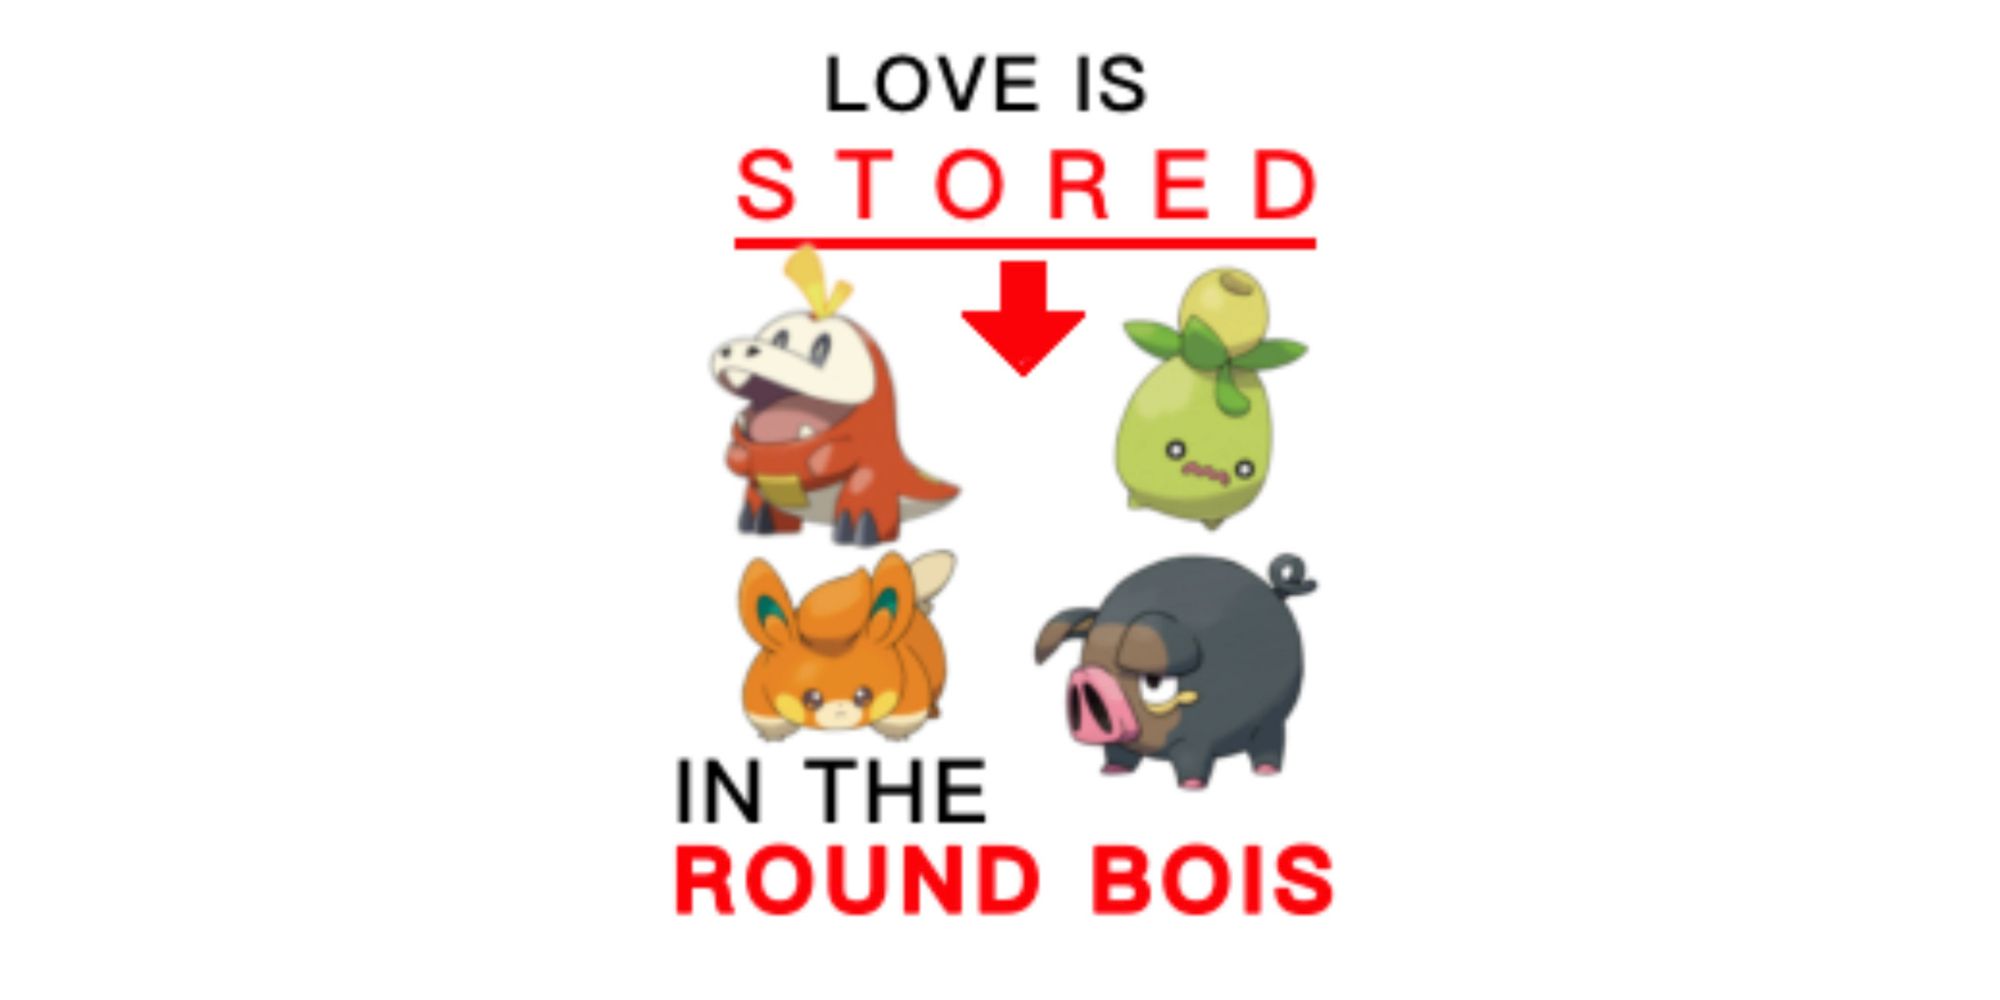 Love is stored in the round boys meme with Scarlet and Violet Pokemon.